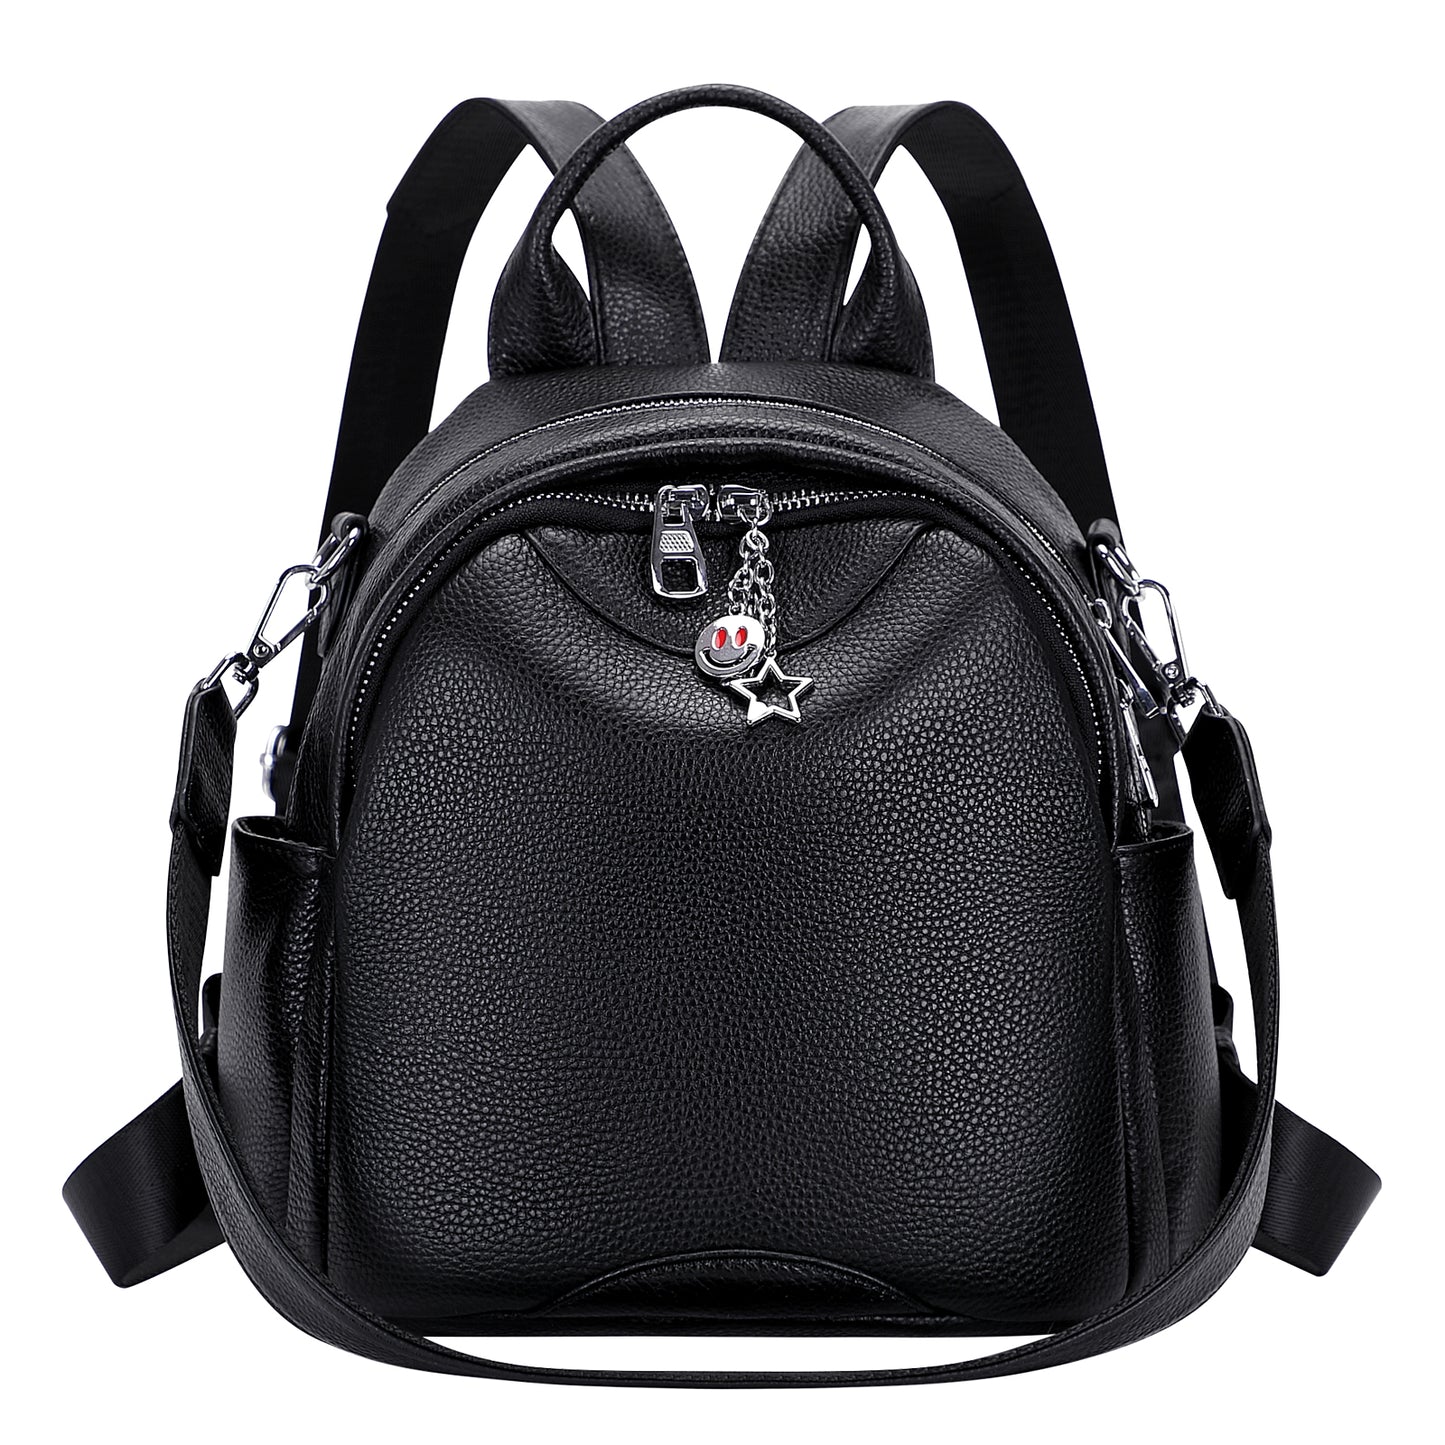 ALTOSY Small Leather Backpack